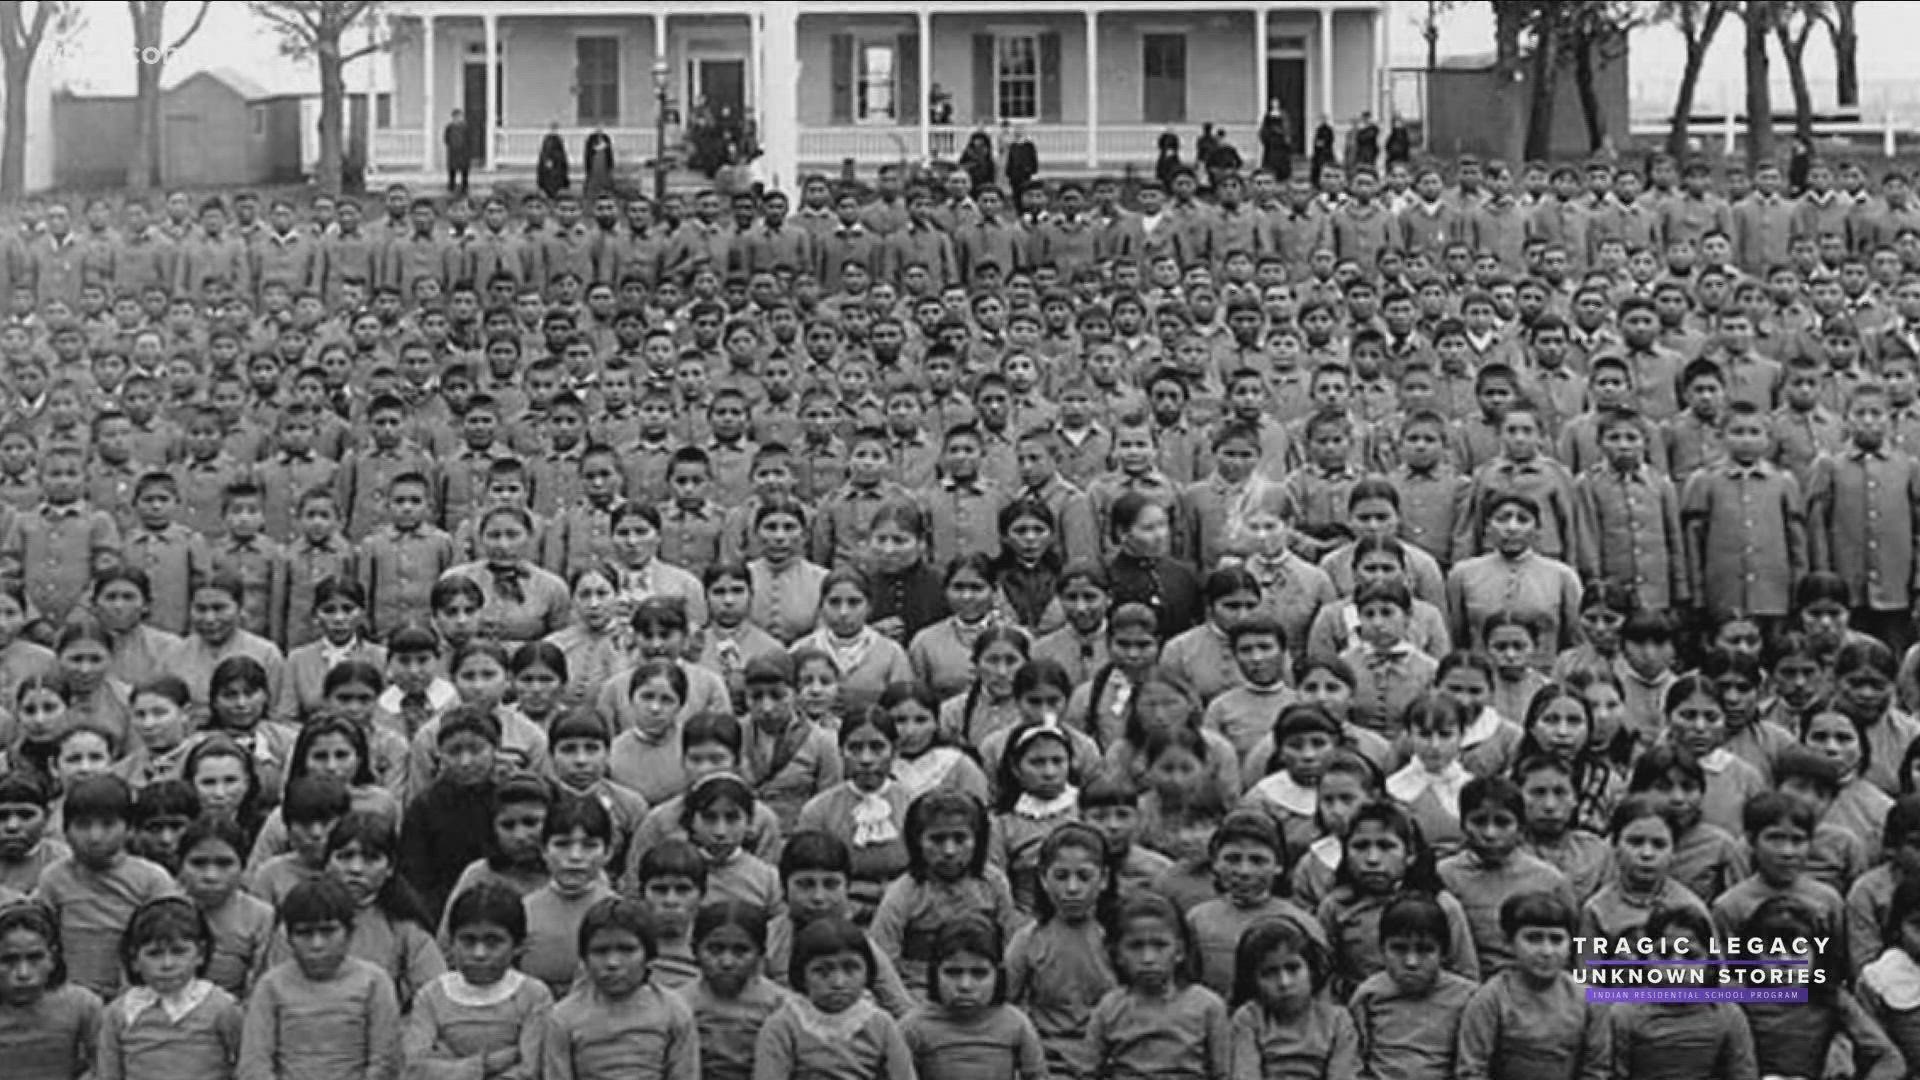 The unknown story of the Indian residential school program.  Where do we go from here?